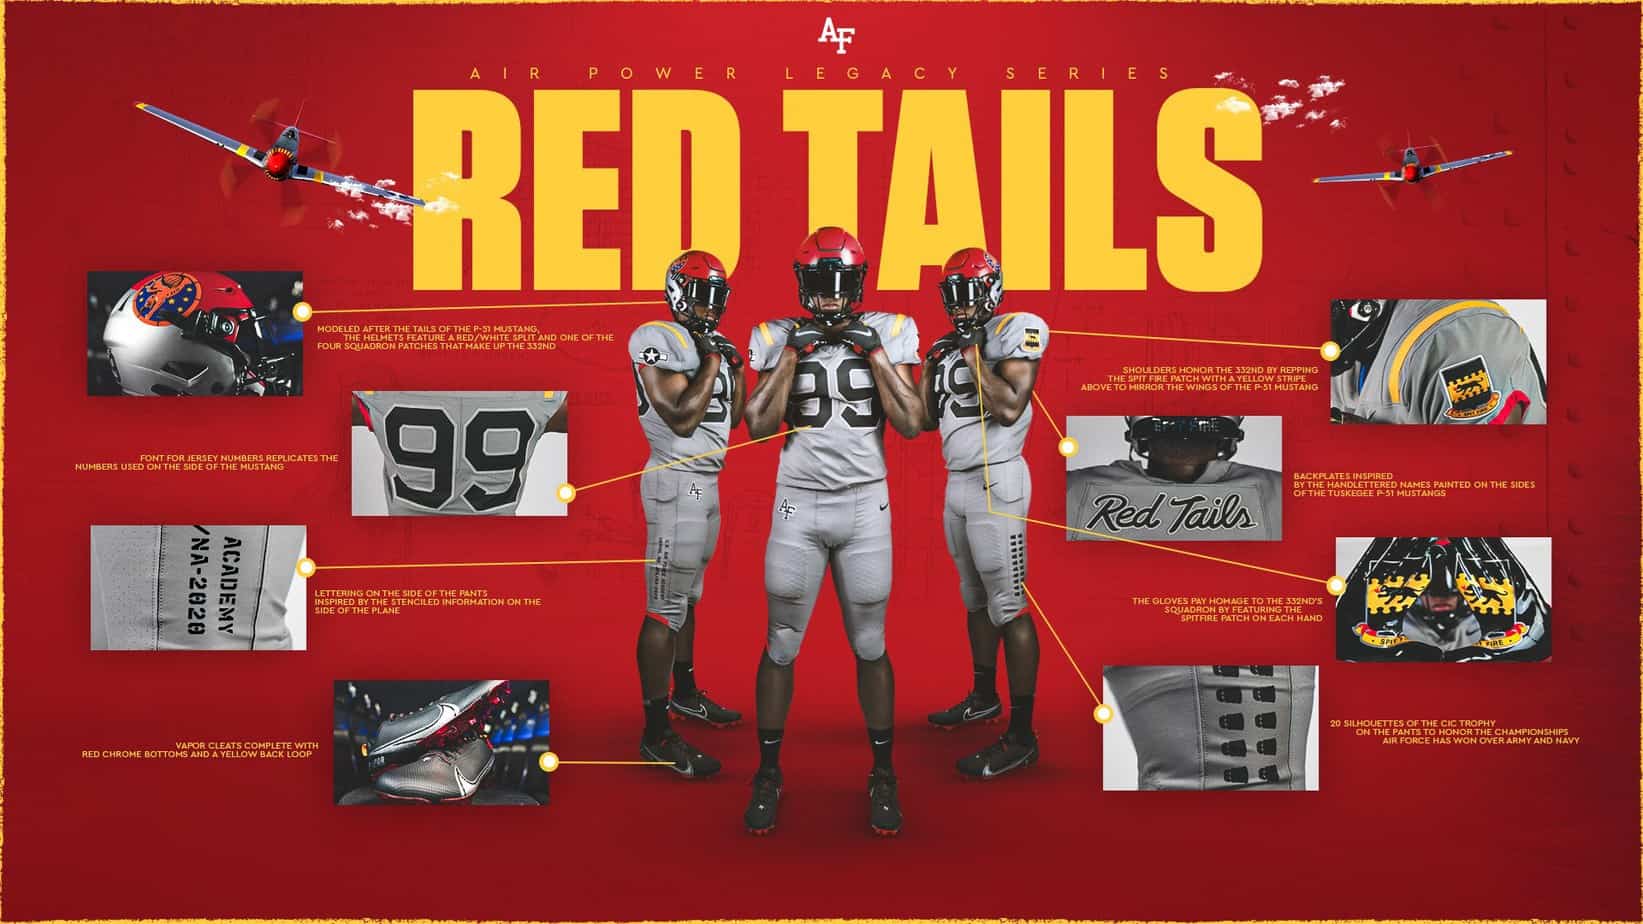 Tuskegee Airmen will be honored by the Air Force football team's new 2020 Air Power Legacy Series uniforms, debuting Oct. 3.